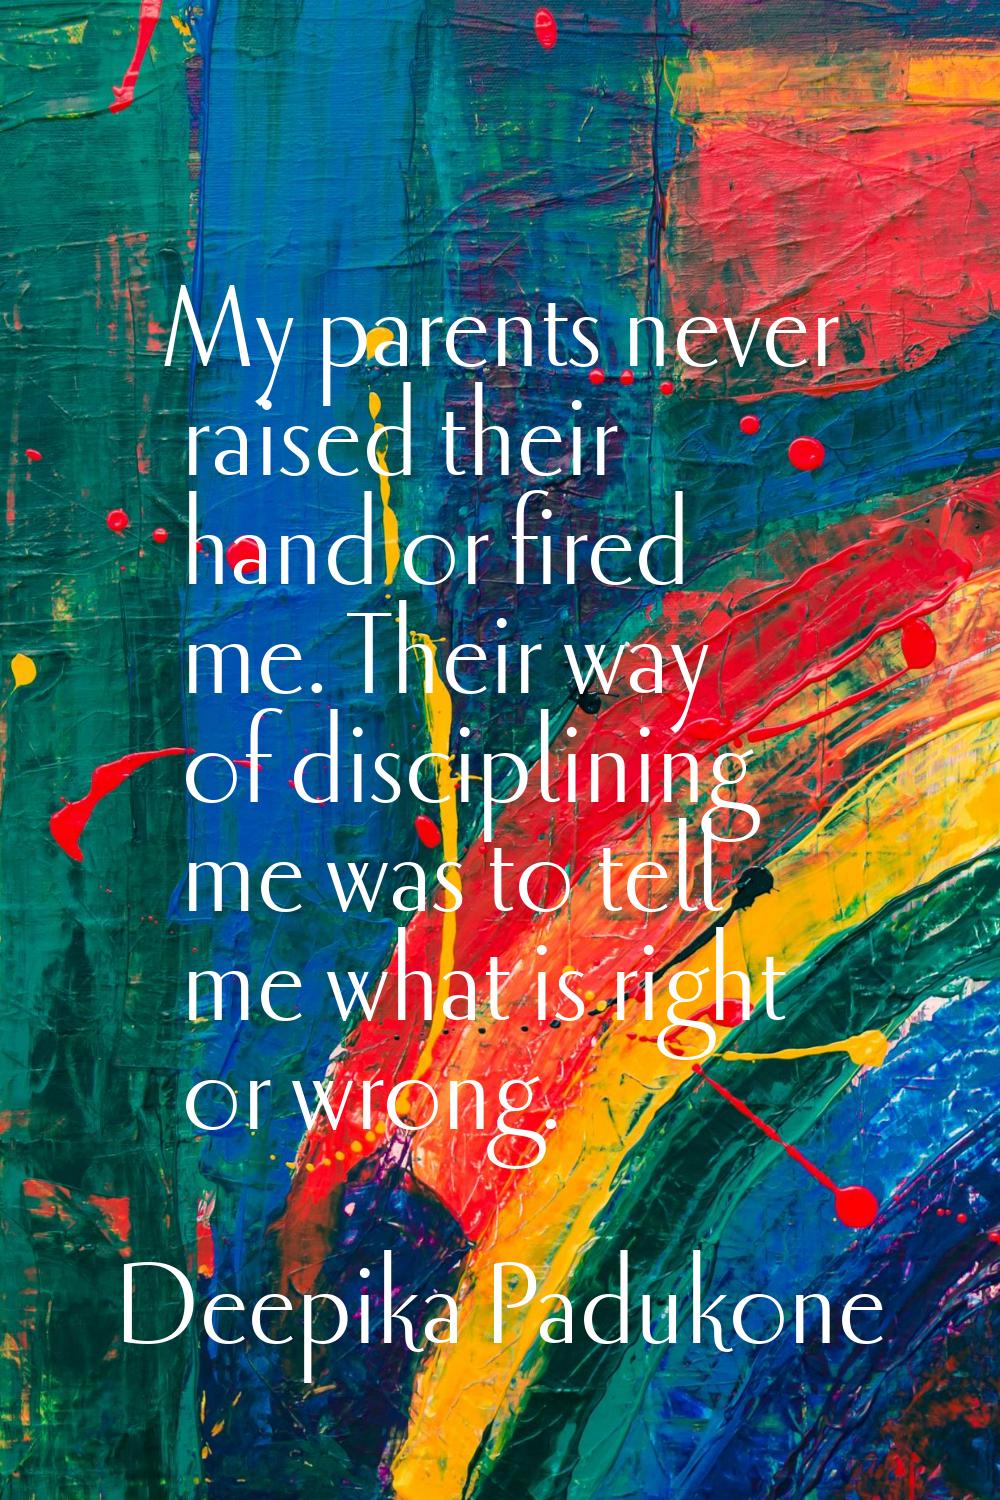 My parents never raised their hand or fired me. Their way of disciplining me was to tell me what is